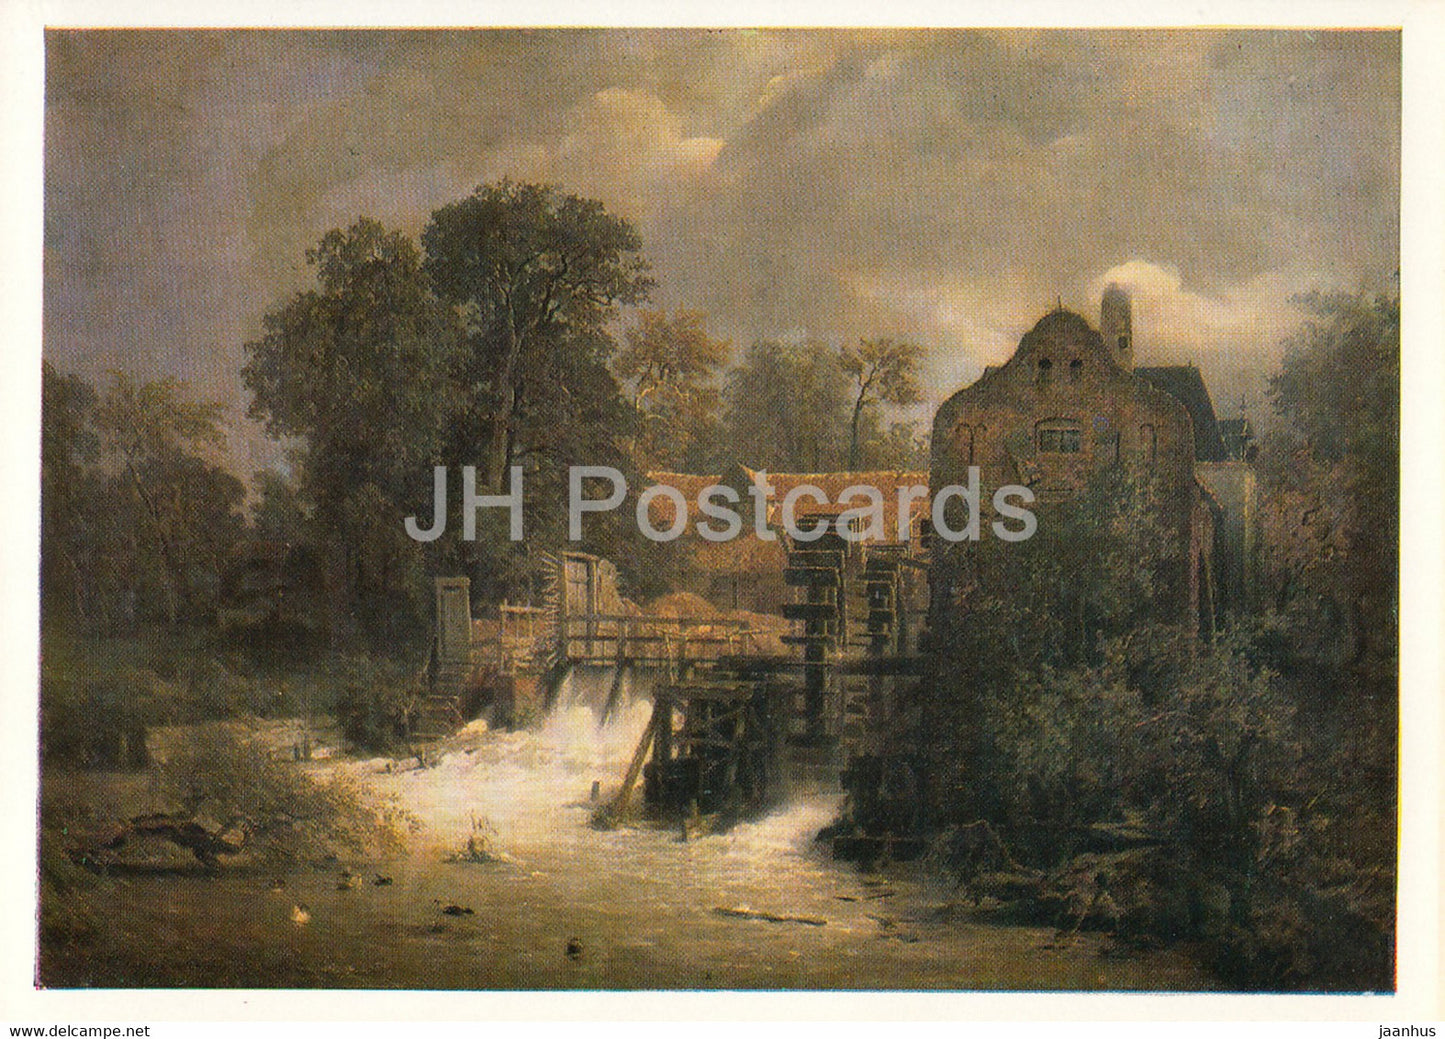 painting by Andreas Achenbach - Westfalische Muhle - watermill - 1168 - German art - Germany DDR - unused - JH Postcards